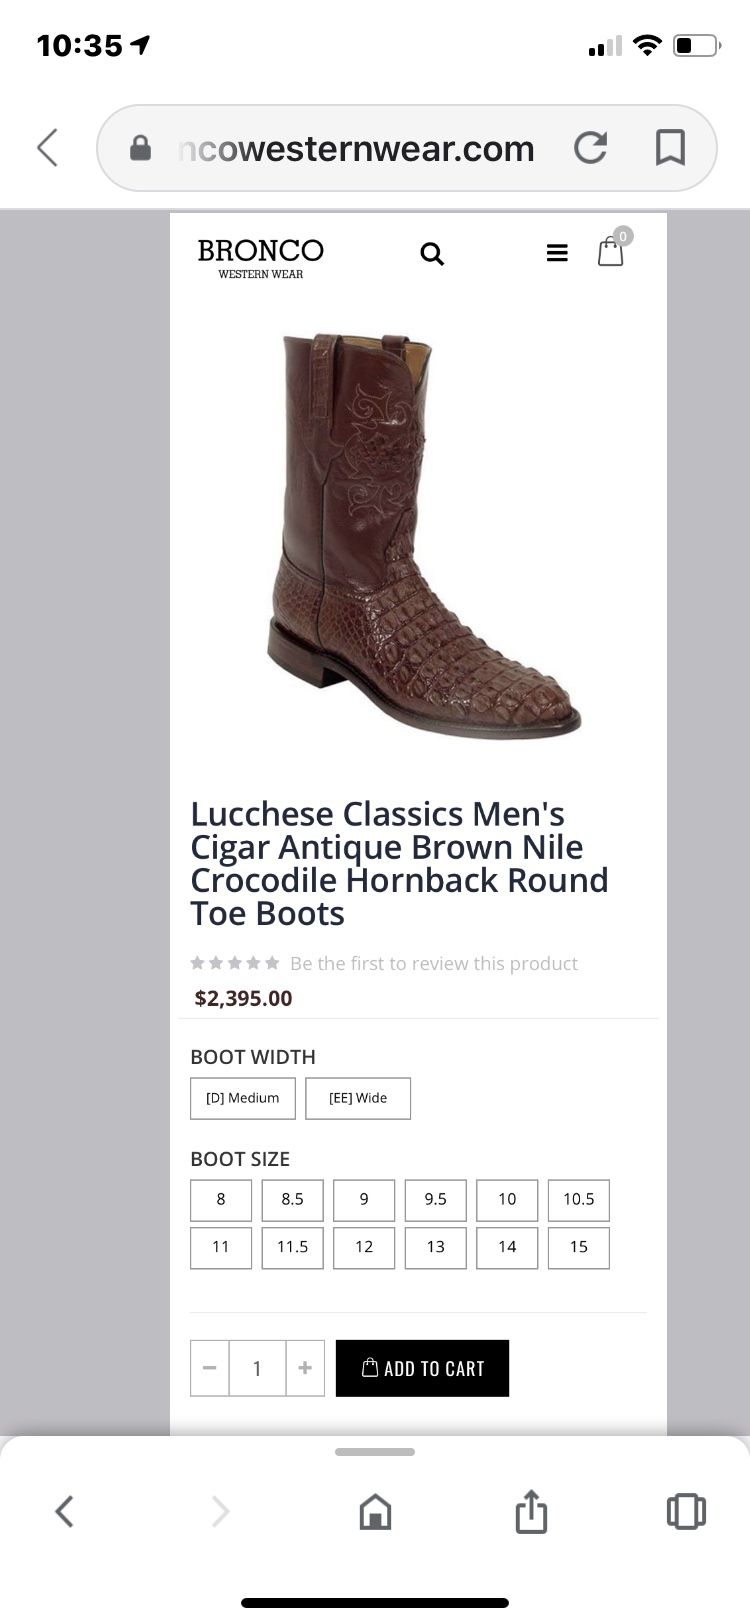 Lucchese classic Horn back crocodile roper style cowboy boots. 10 1/2EE